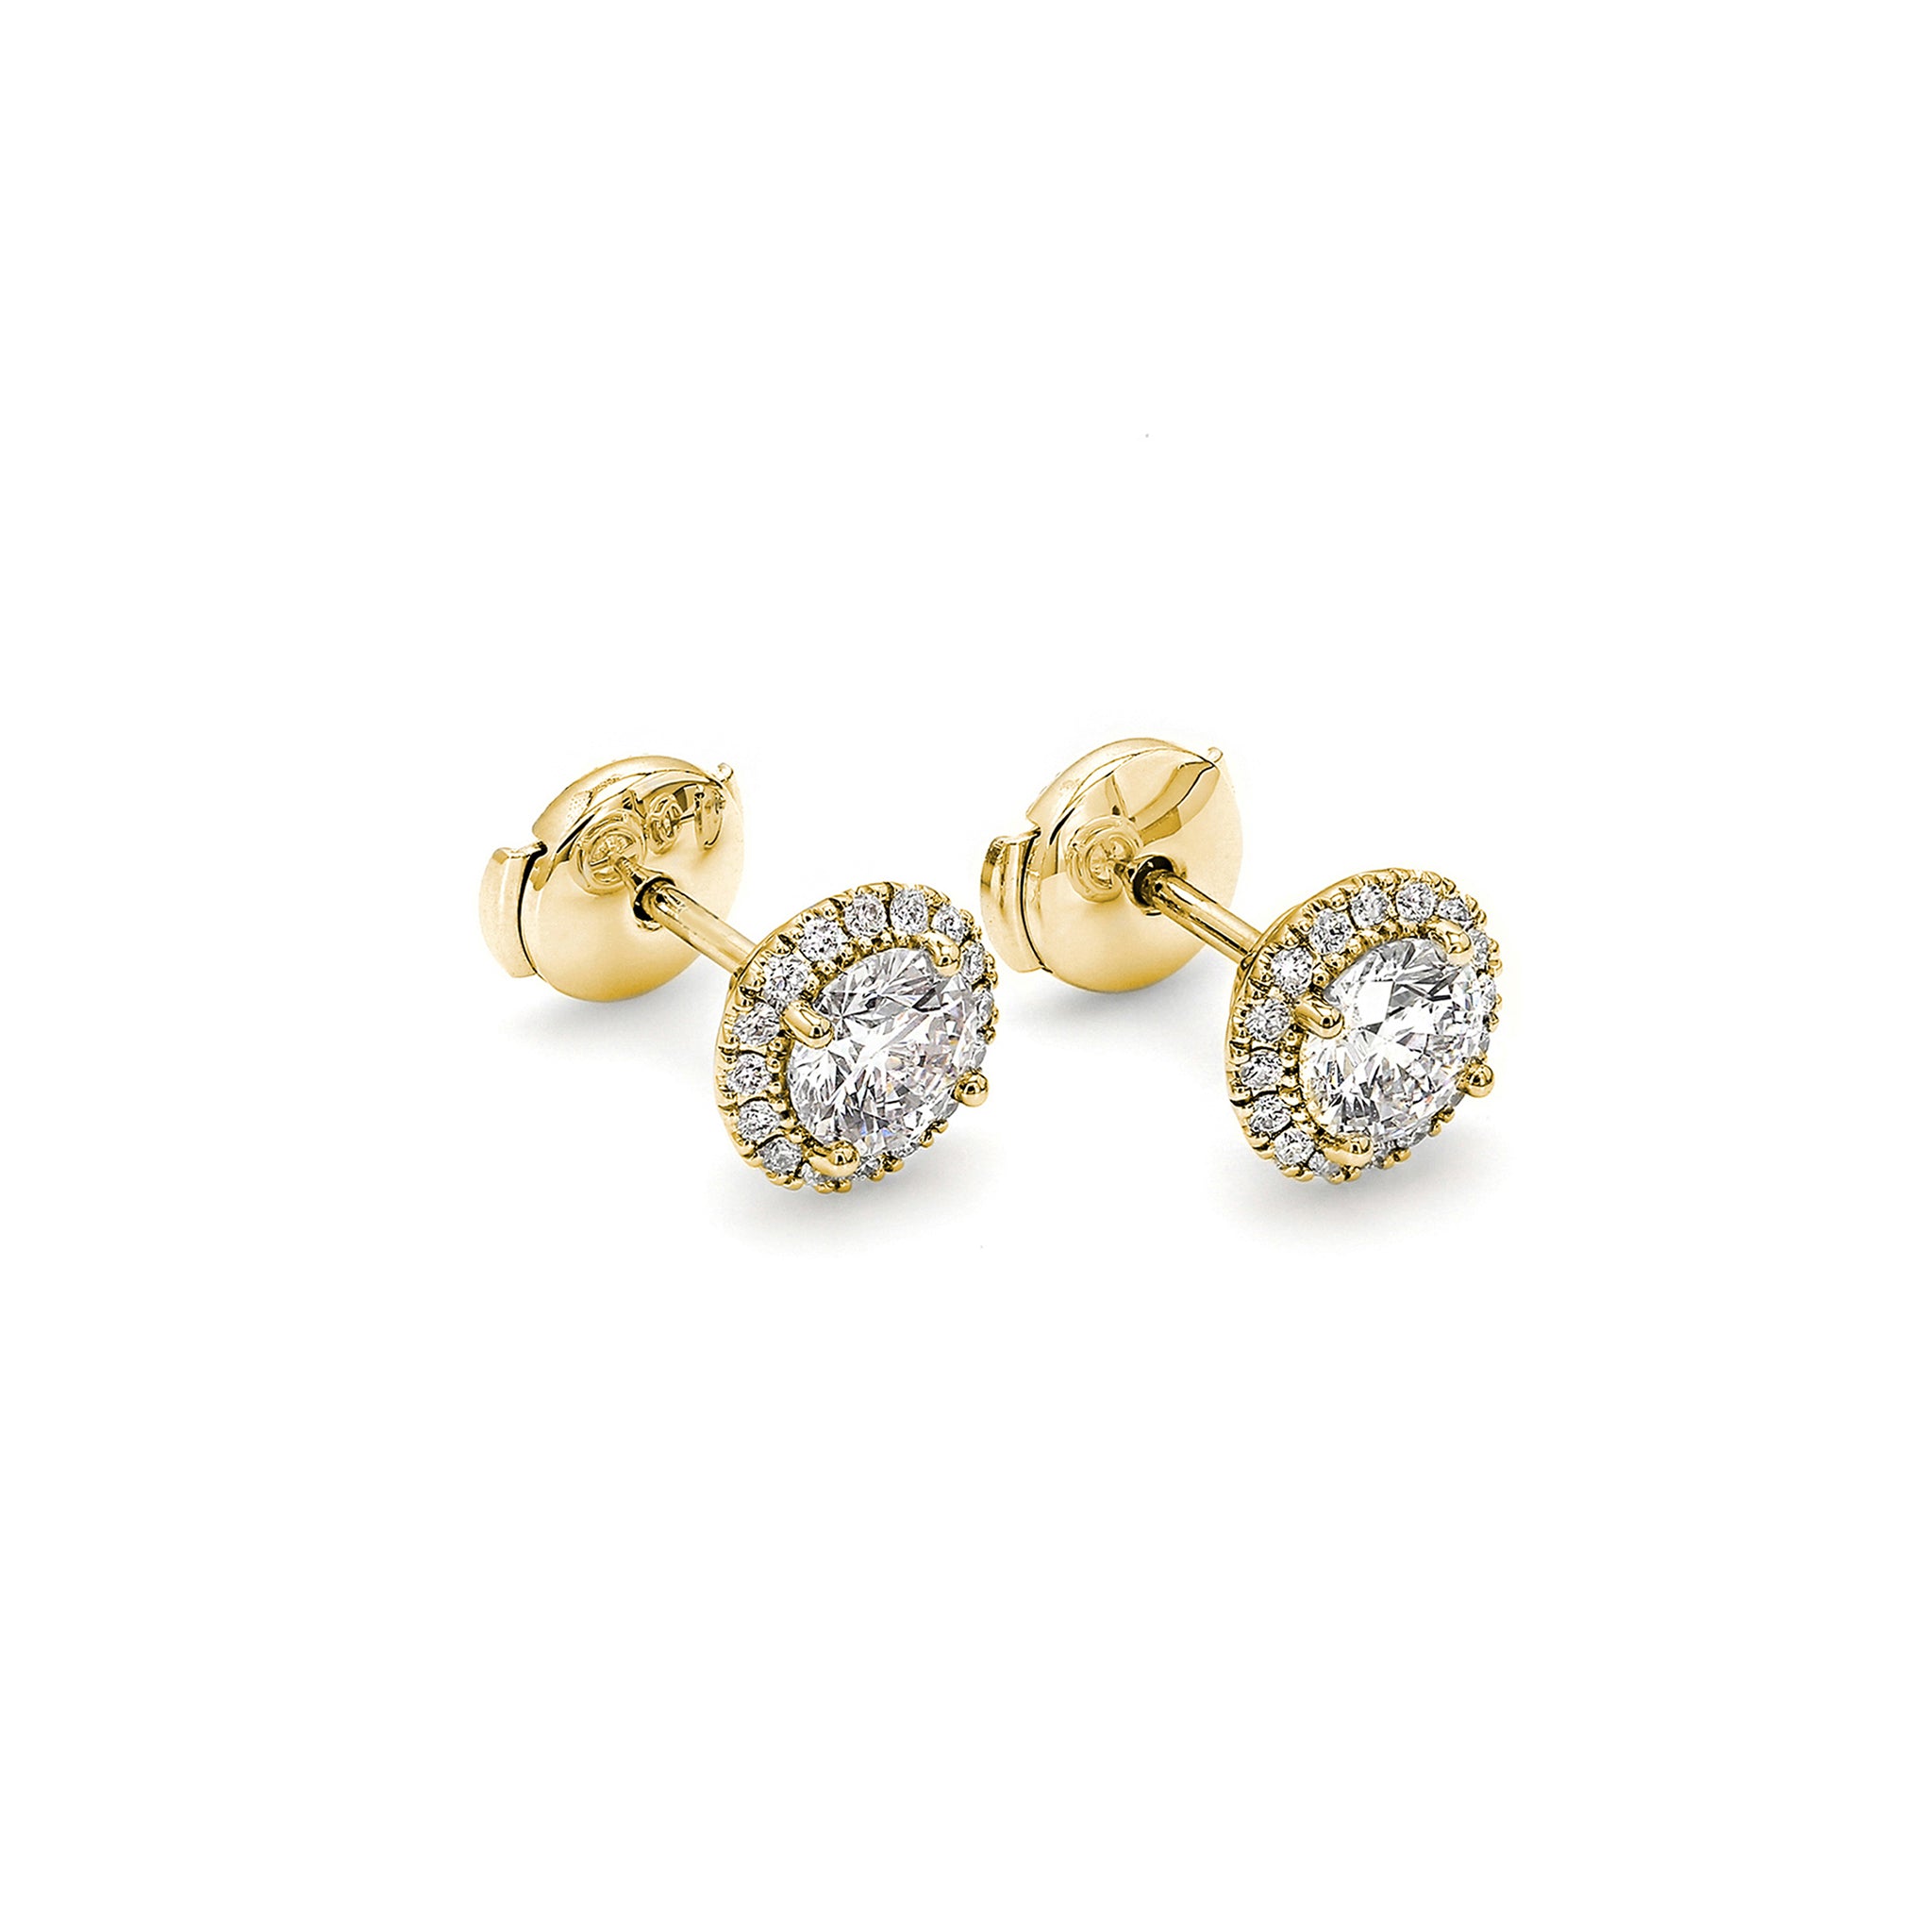 Shimansky - Diamond Microset Halo Earrings 0.30ct crafted in 18K Yellow Gold